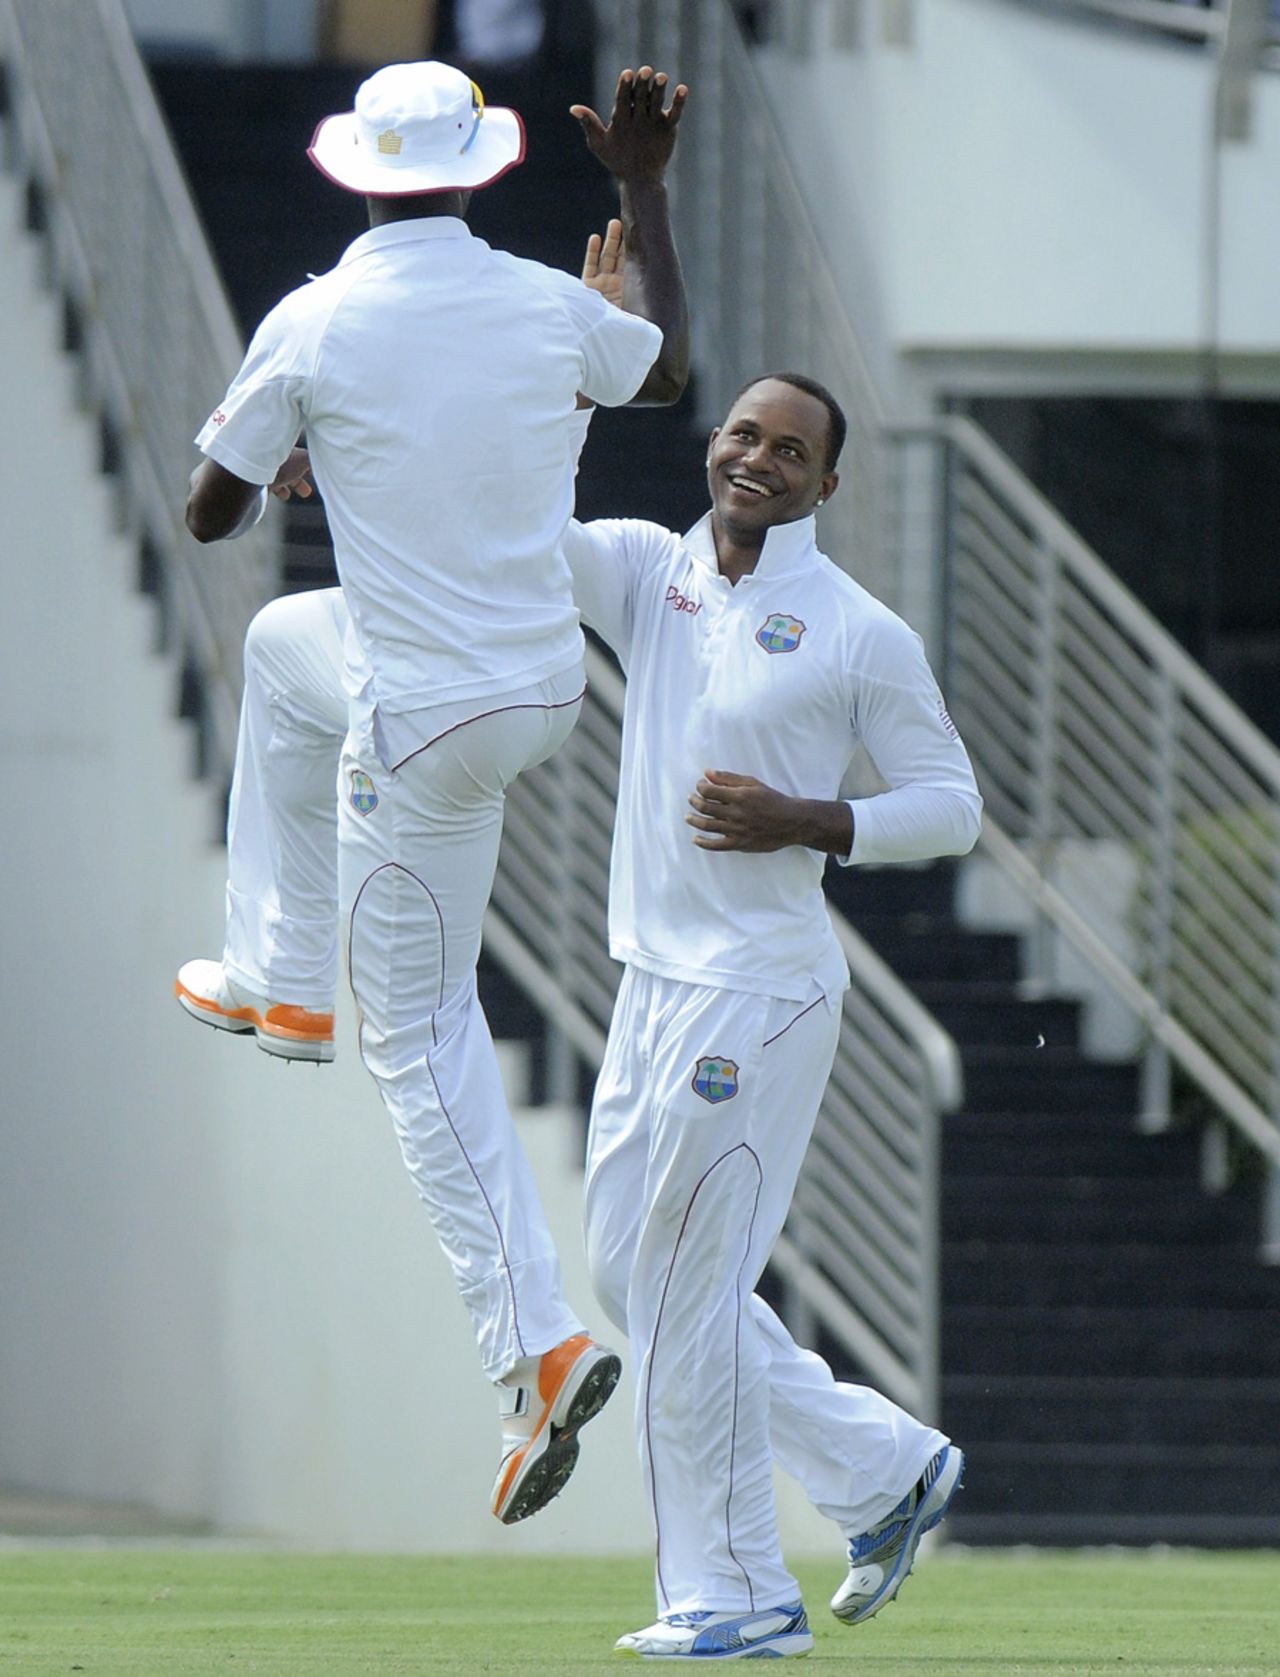 Marlon Samuels struck with his first delivery, West Indies v Zimbabwe, 1st Test, Barbados, 1st day, March 12, 2013